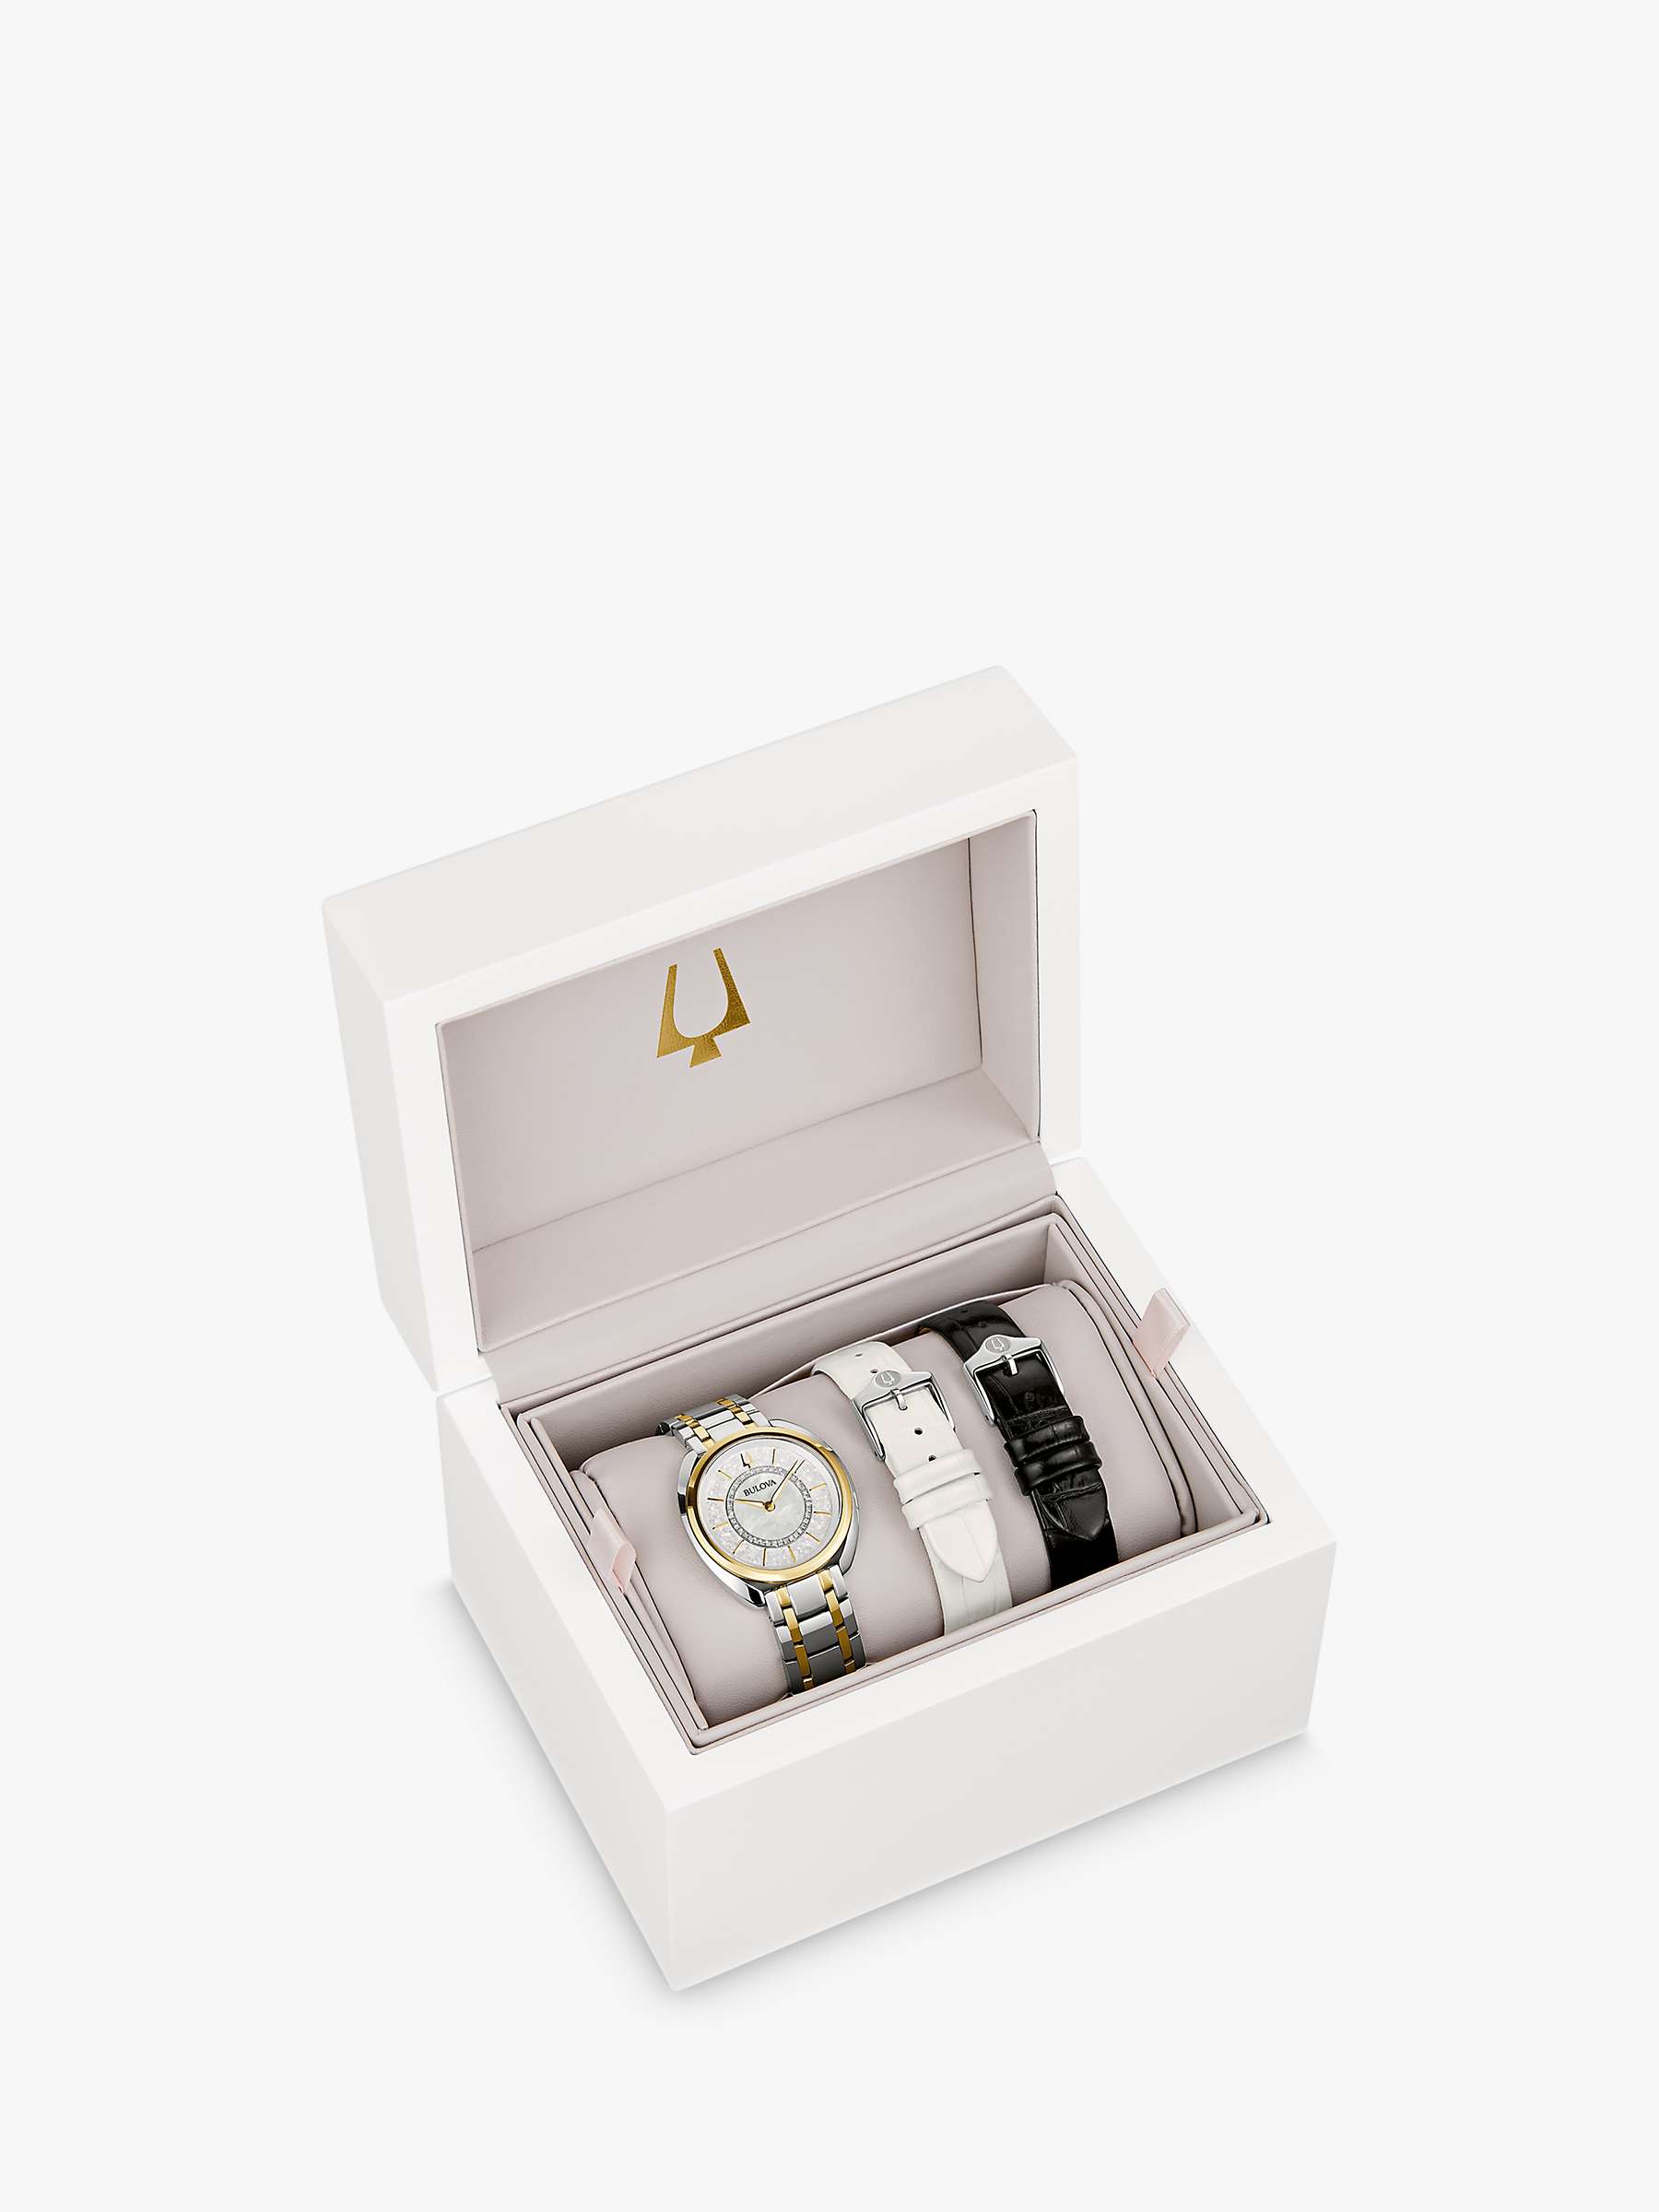 Buy Bulova 98X134 Women's Classic Duality Interchangeable Strap Watch, Gold/Silver Online at johnlewis.com